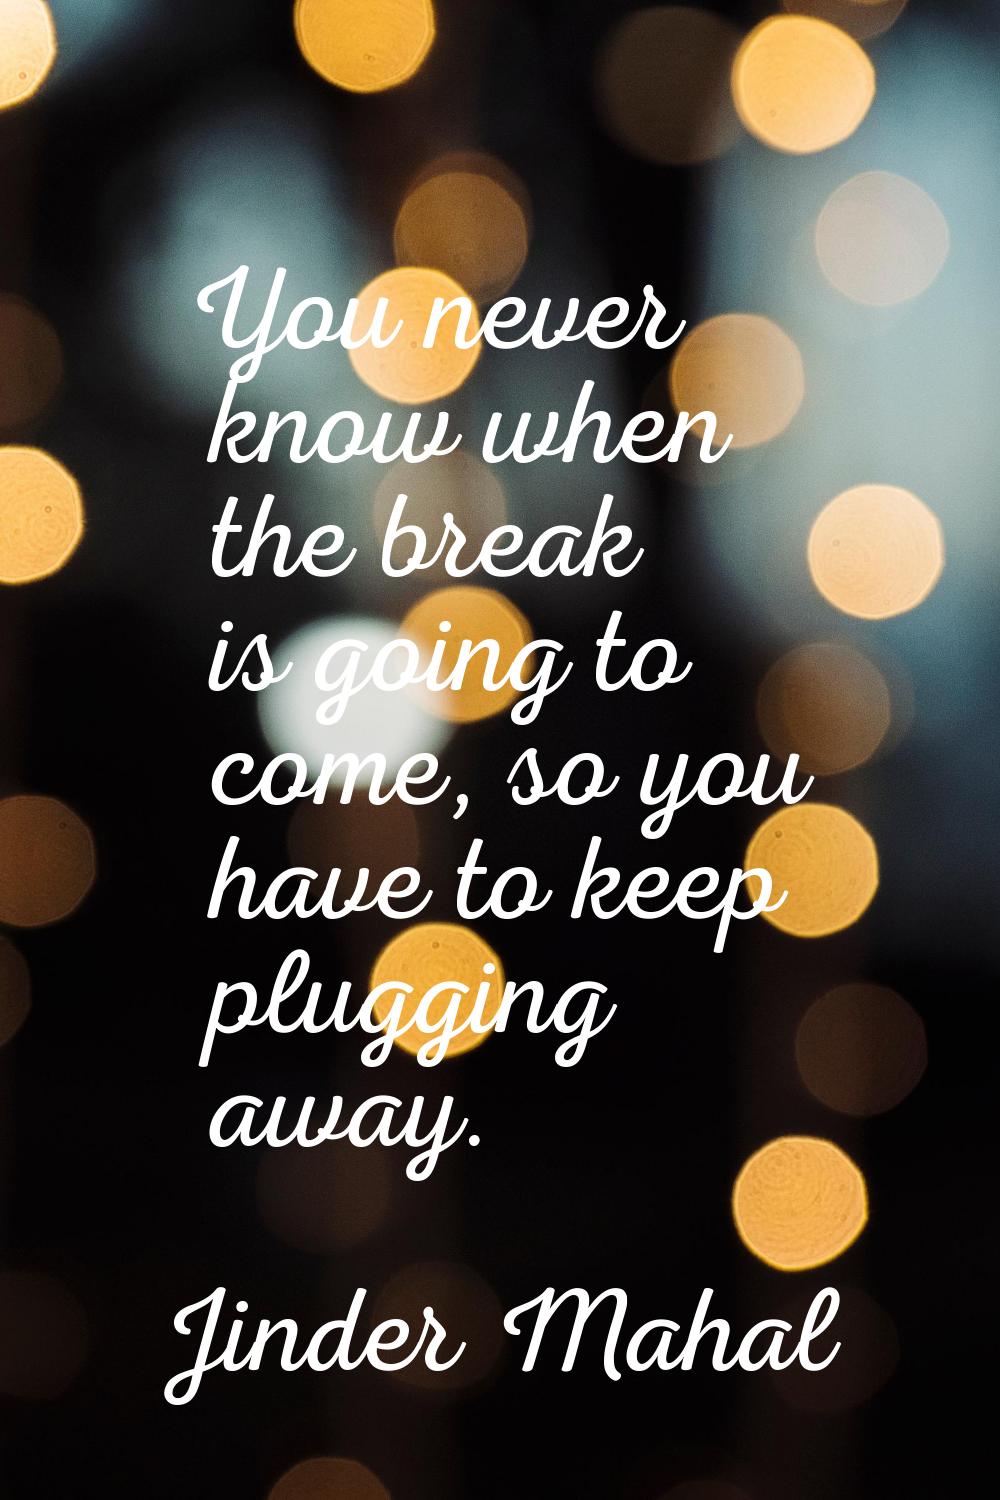 You never know when the break is going to come, so you have to keep plugging away.